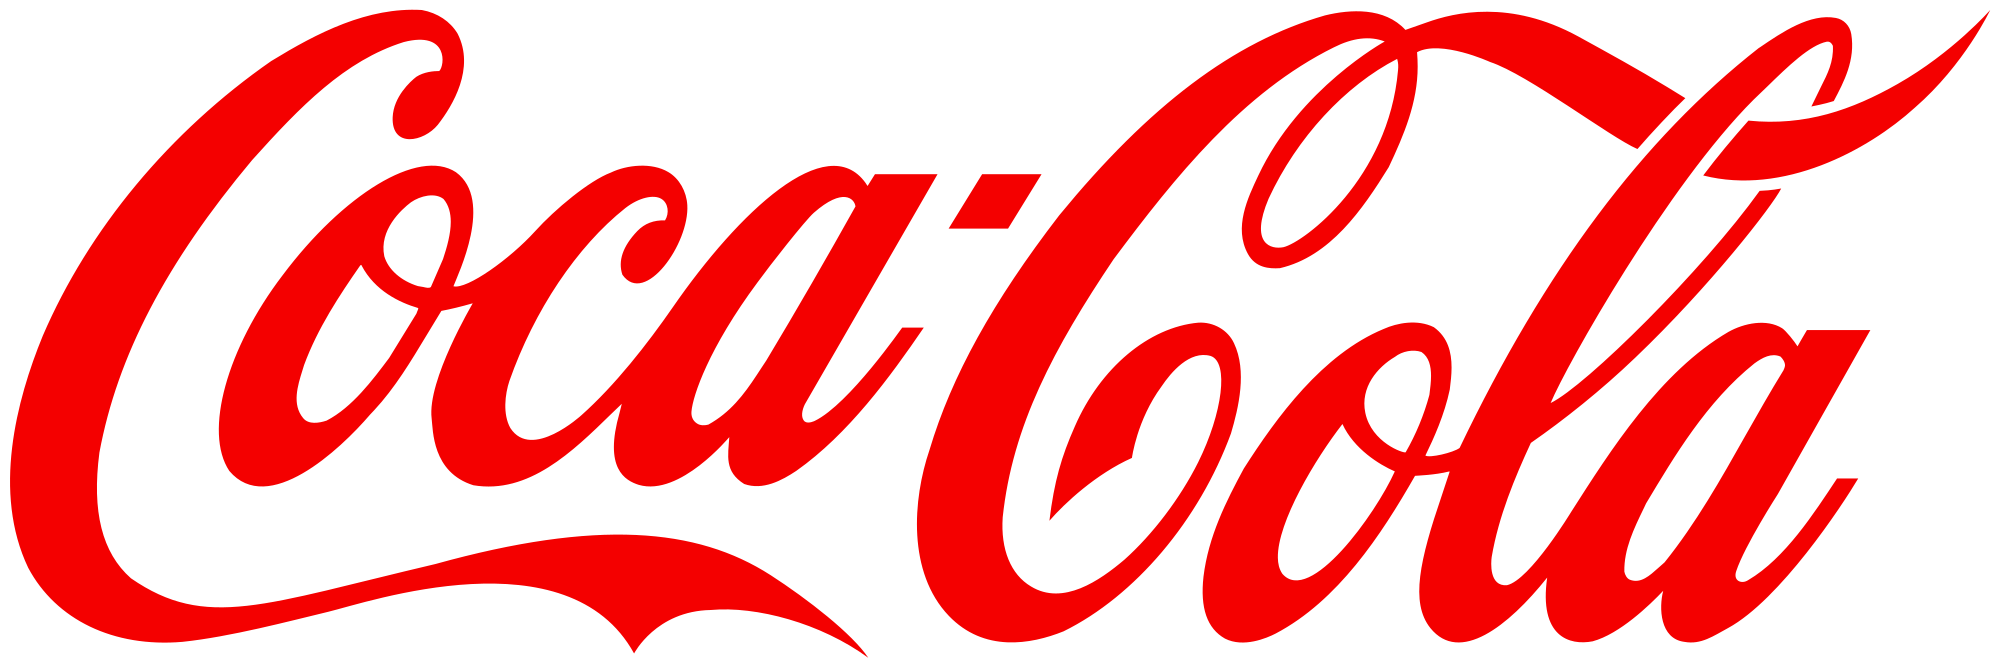 Coca-Cola is an example of consistent branding